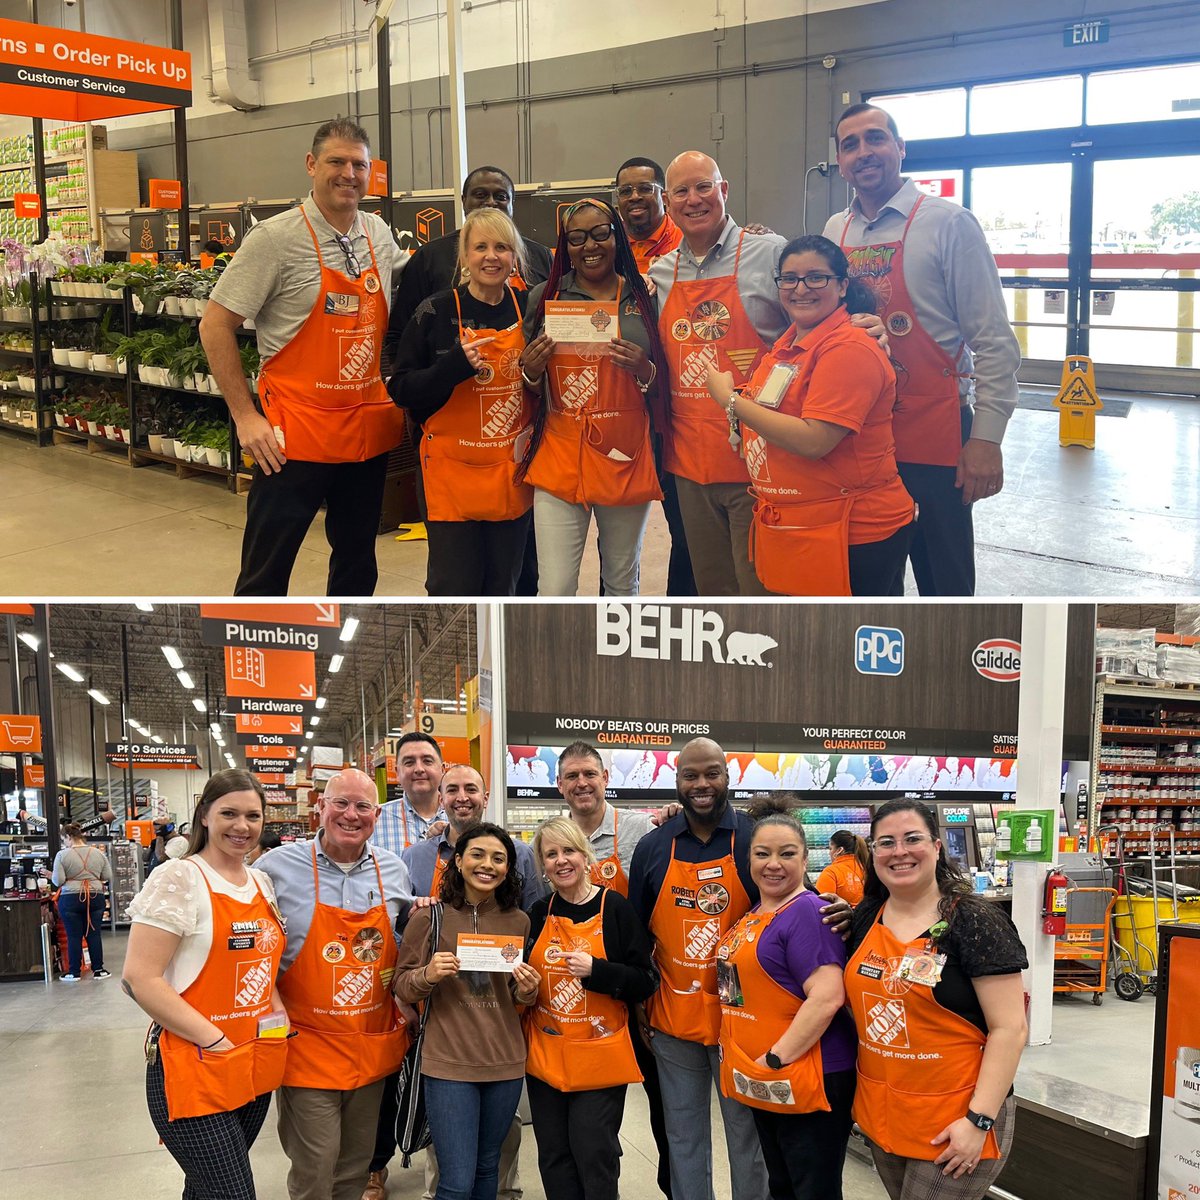 Congrats to Nicole at Pin Oak and Valeria at Gulfgate for being recognized by Ted and Kelly! Thank you both for the amazing impact you have in your stores! We are lucky to have you! #PoweroftheGulf @kelly_mayhall @MejutoAllen @JarrodFarmer4